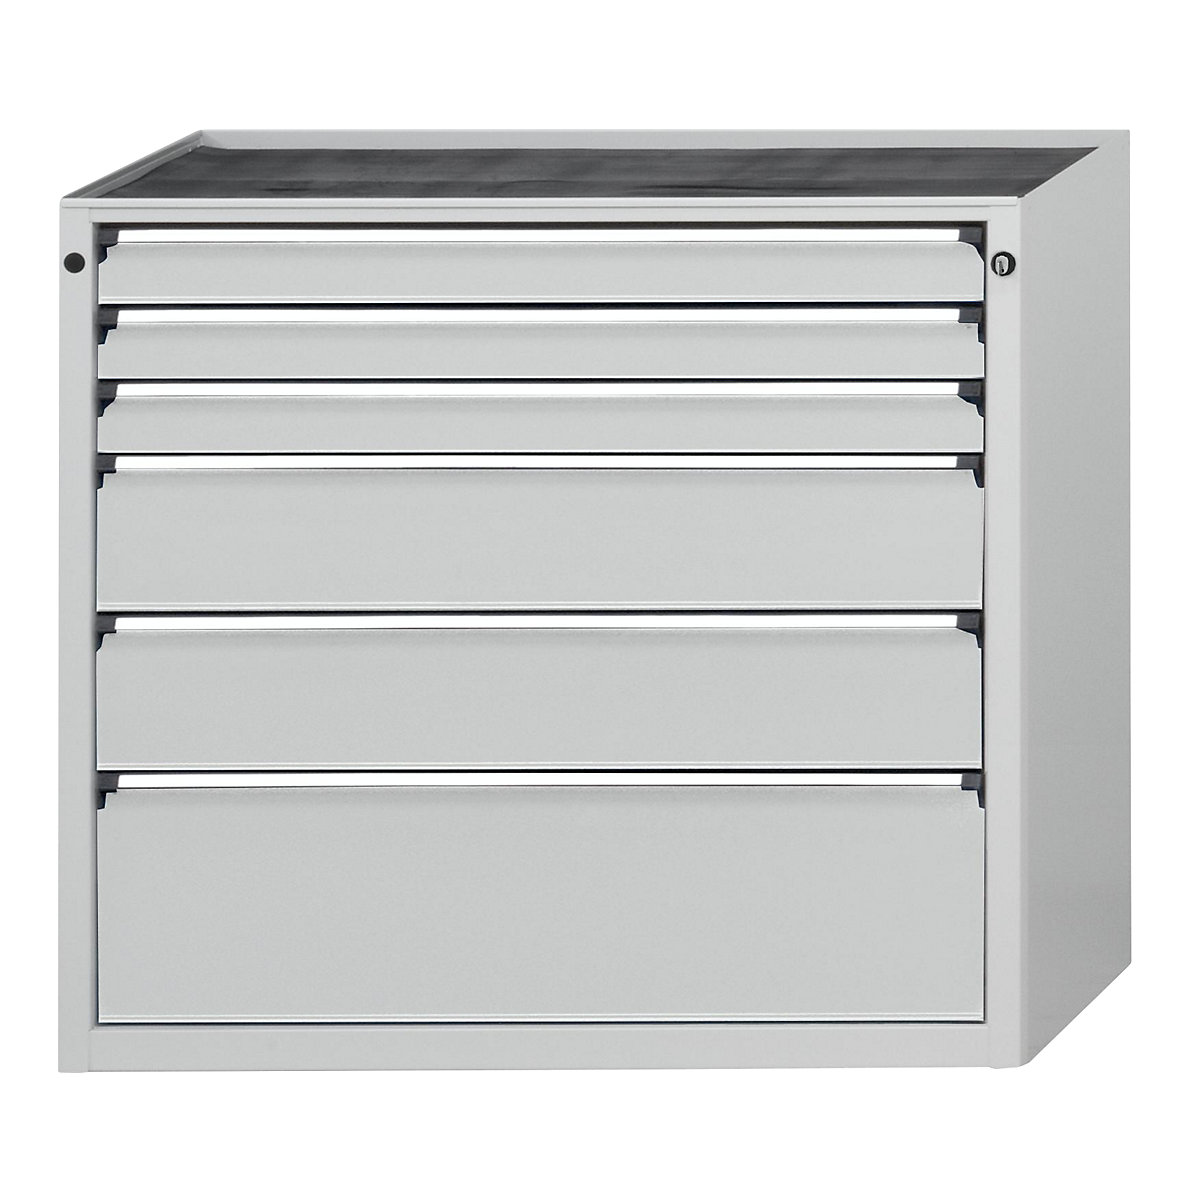 Drawer cupboard without worktop – ANKE, width 1060 mm, max. drawer load 200 kg, 6 drawers, front in light grey-8